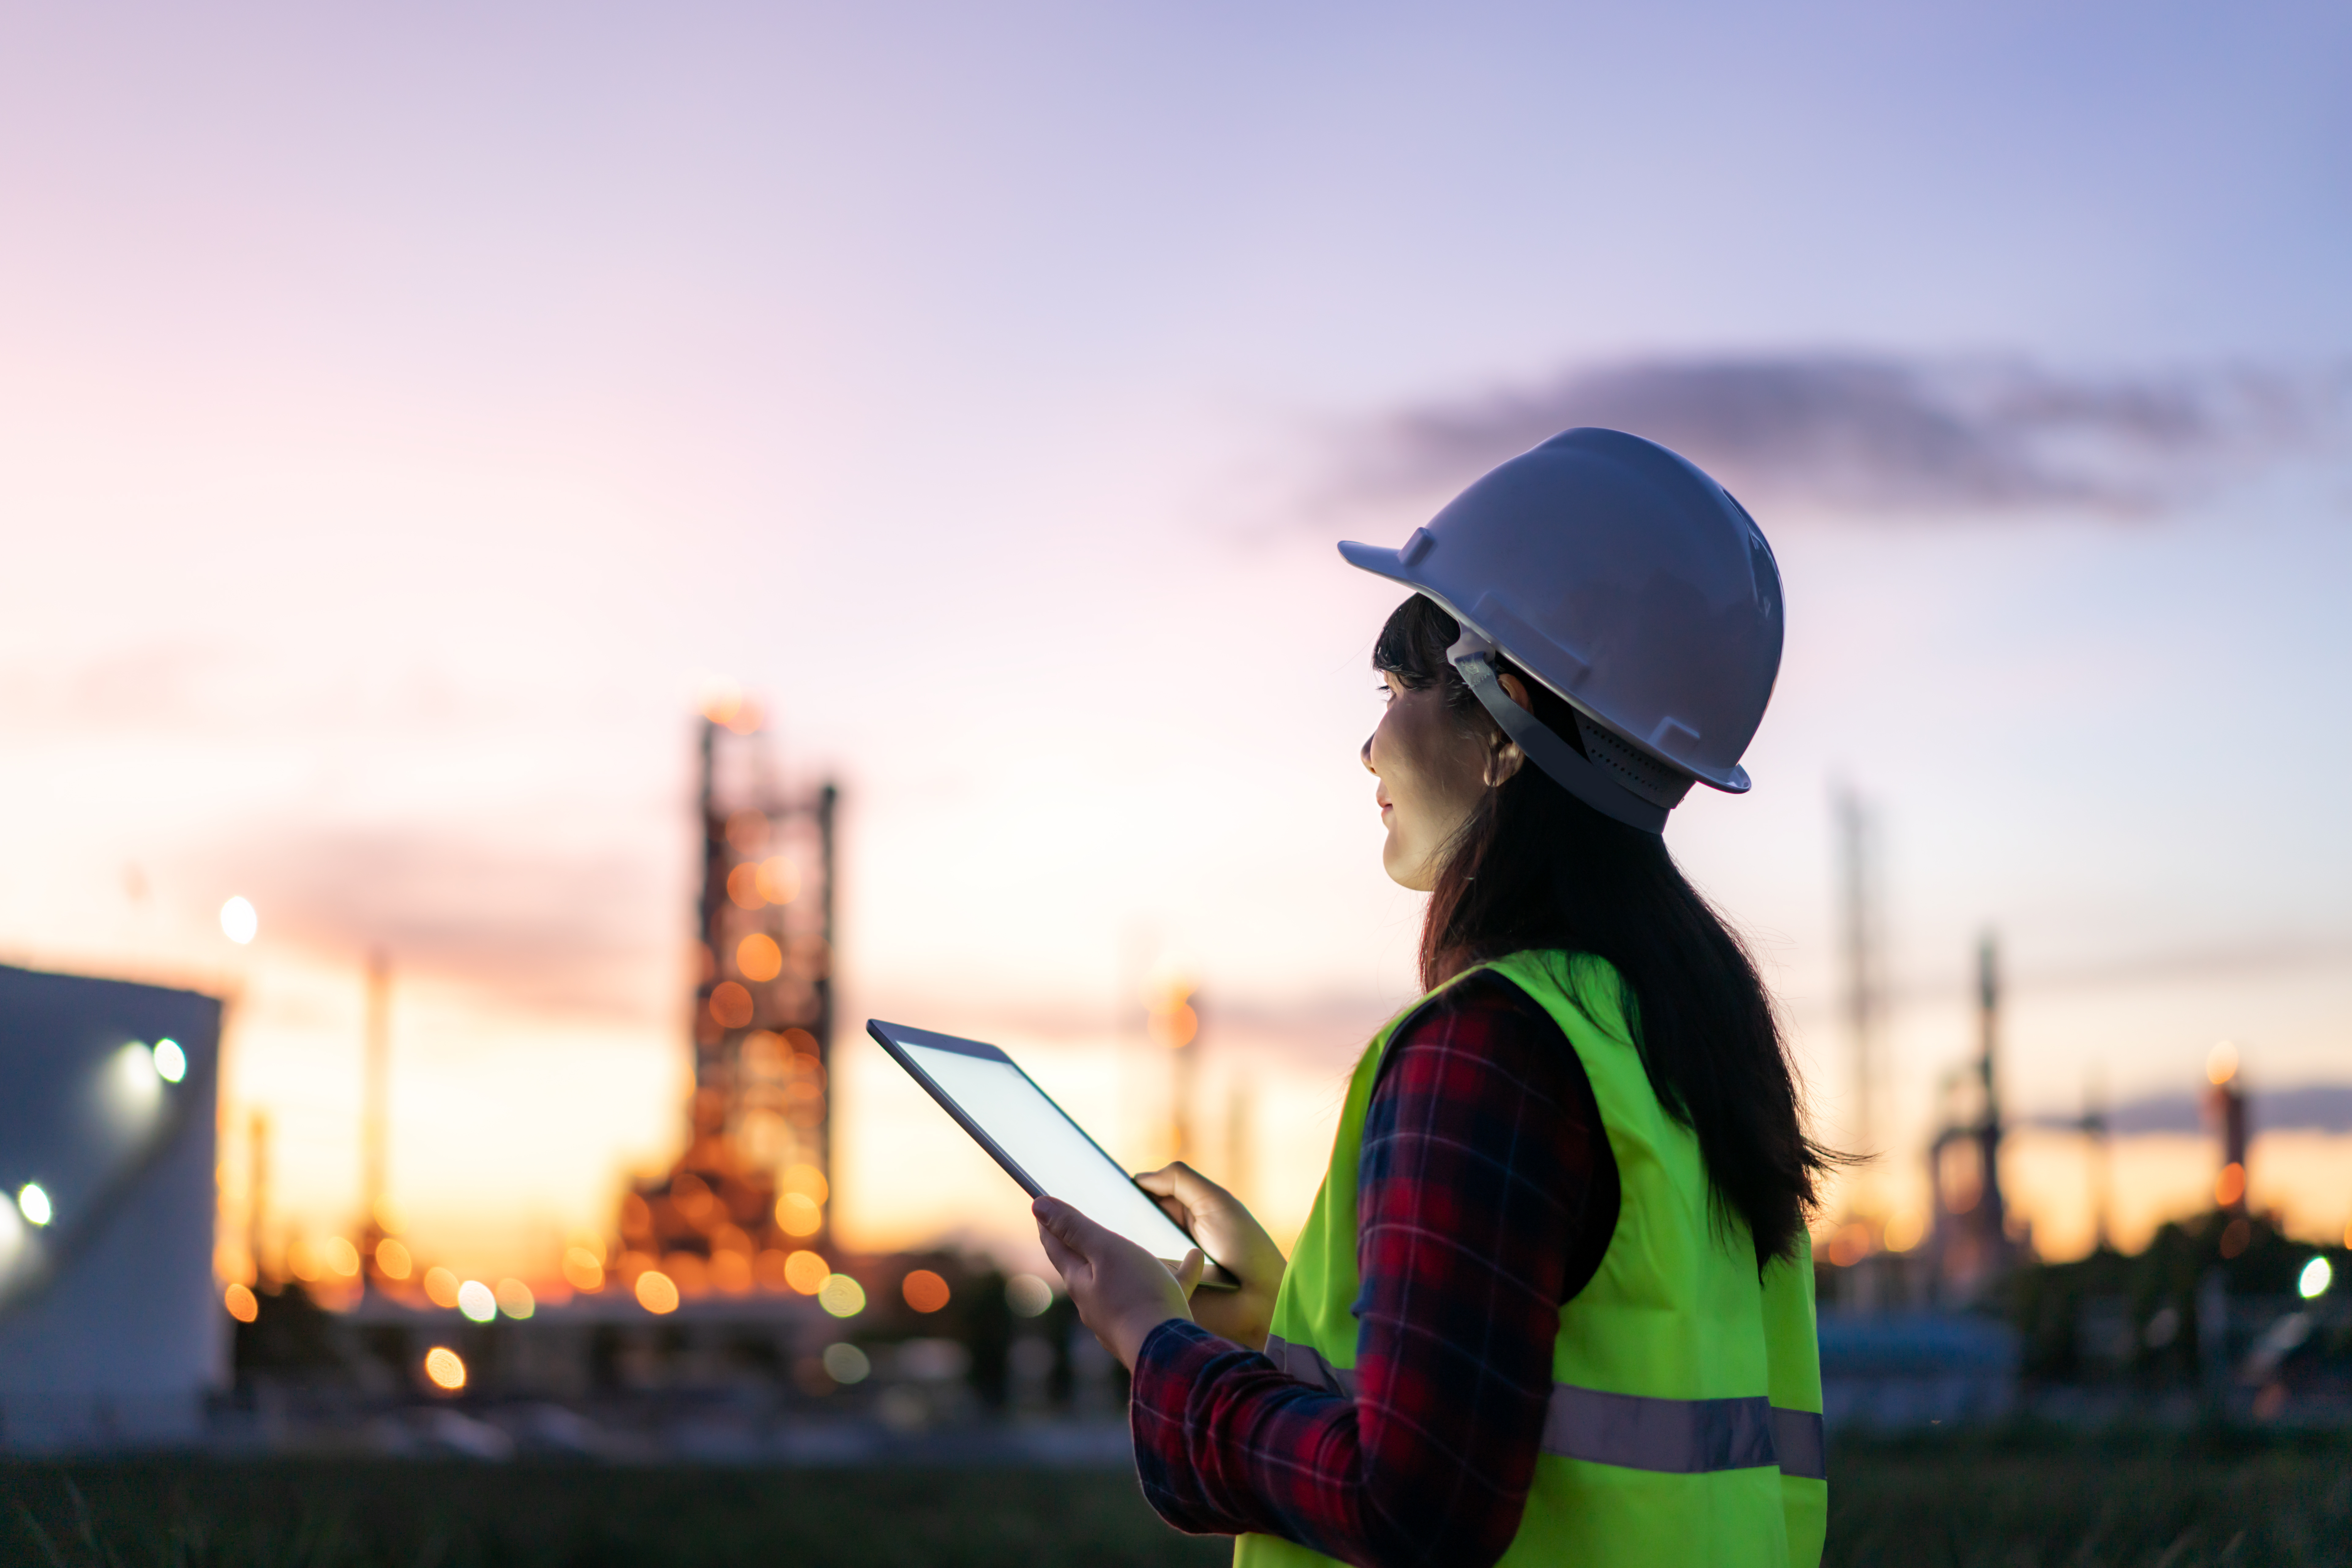 Asian woman engineer working at night with digital tablet Inside an oil and gas refinery plant construction for inspector safety quality control